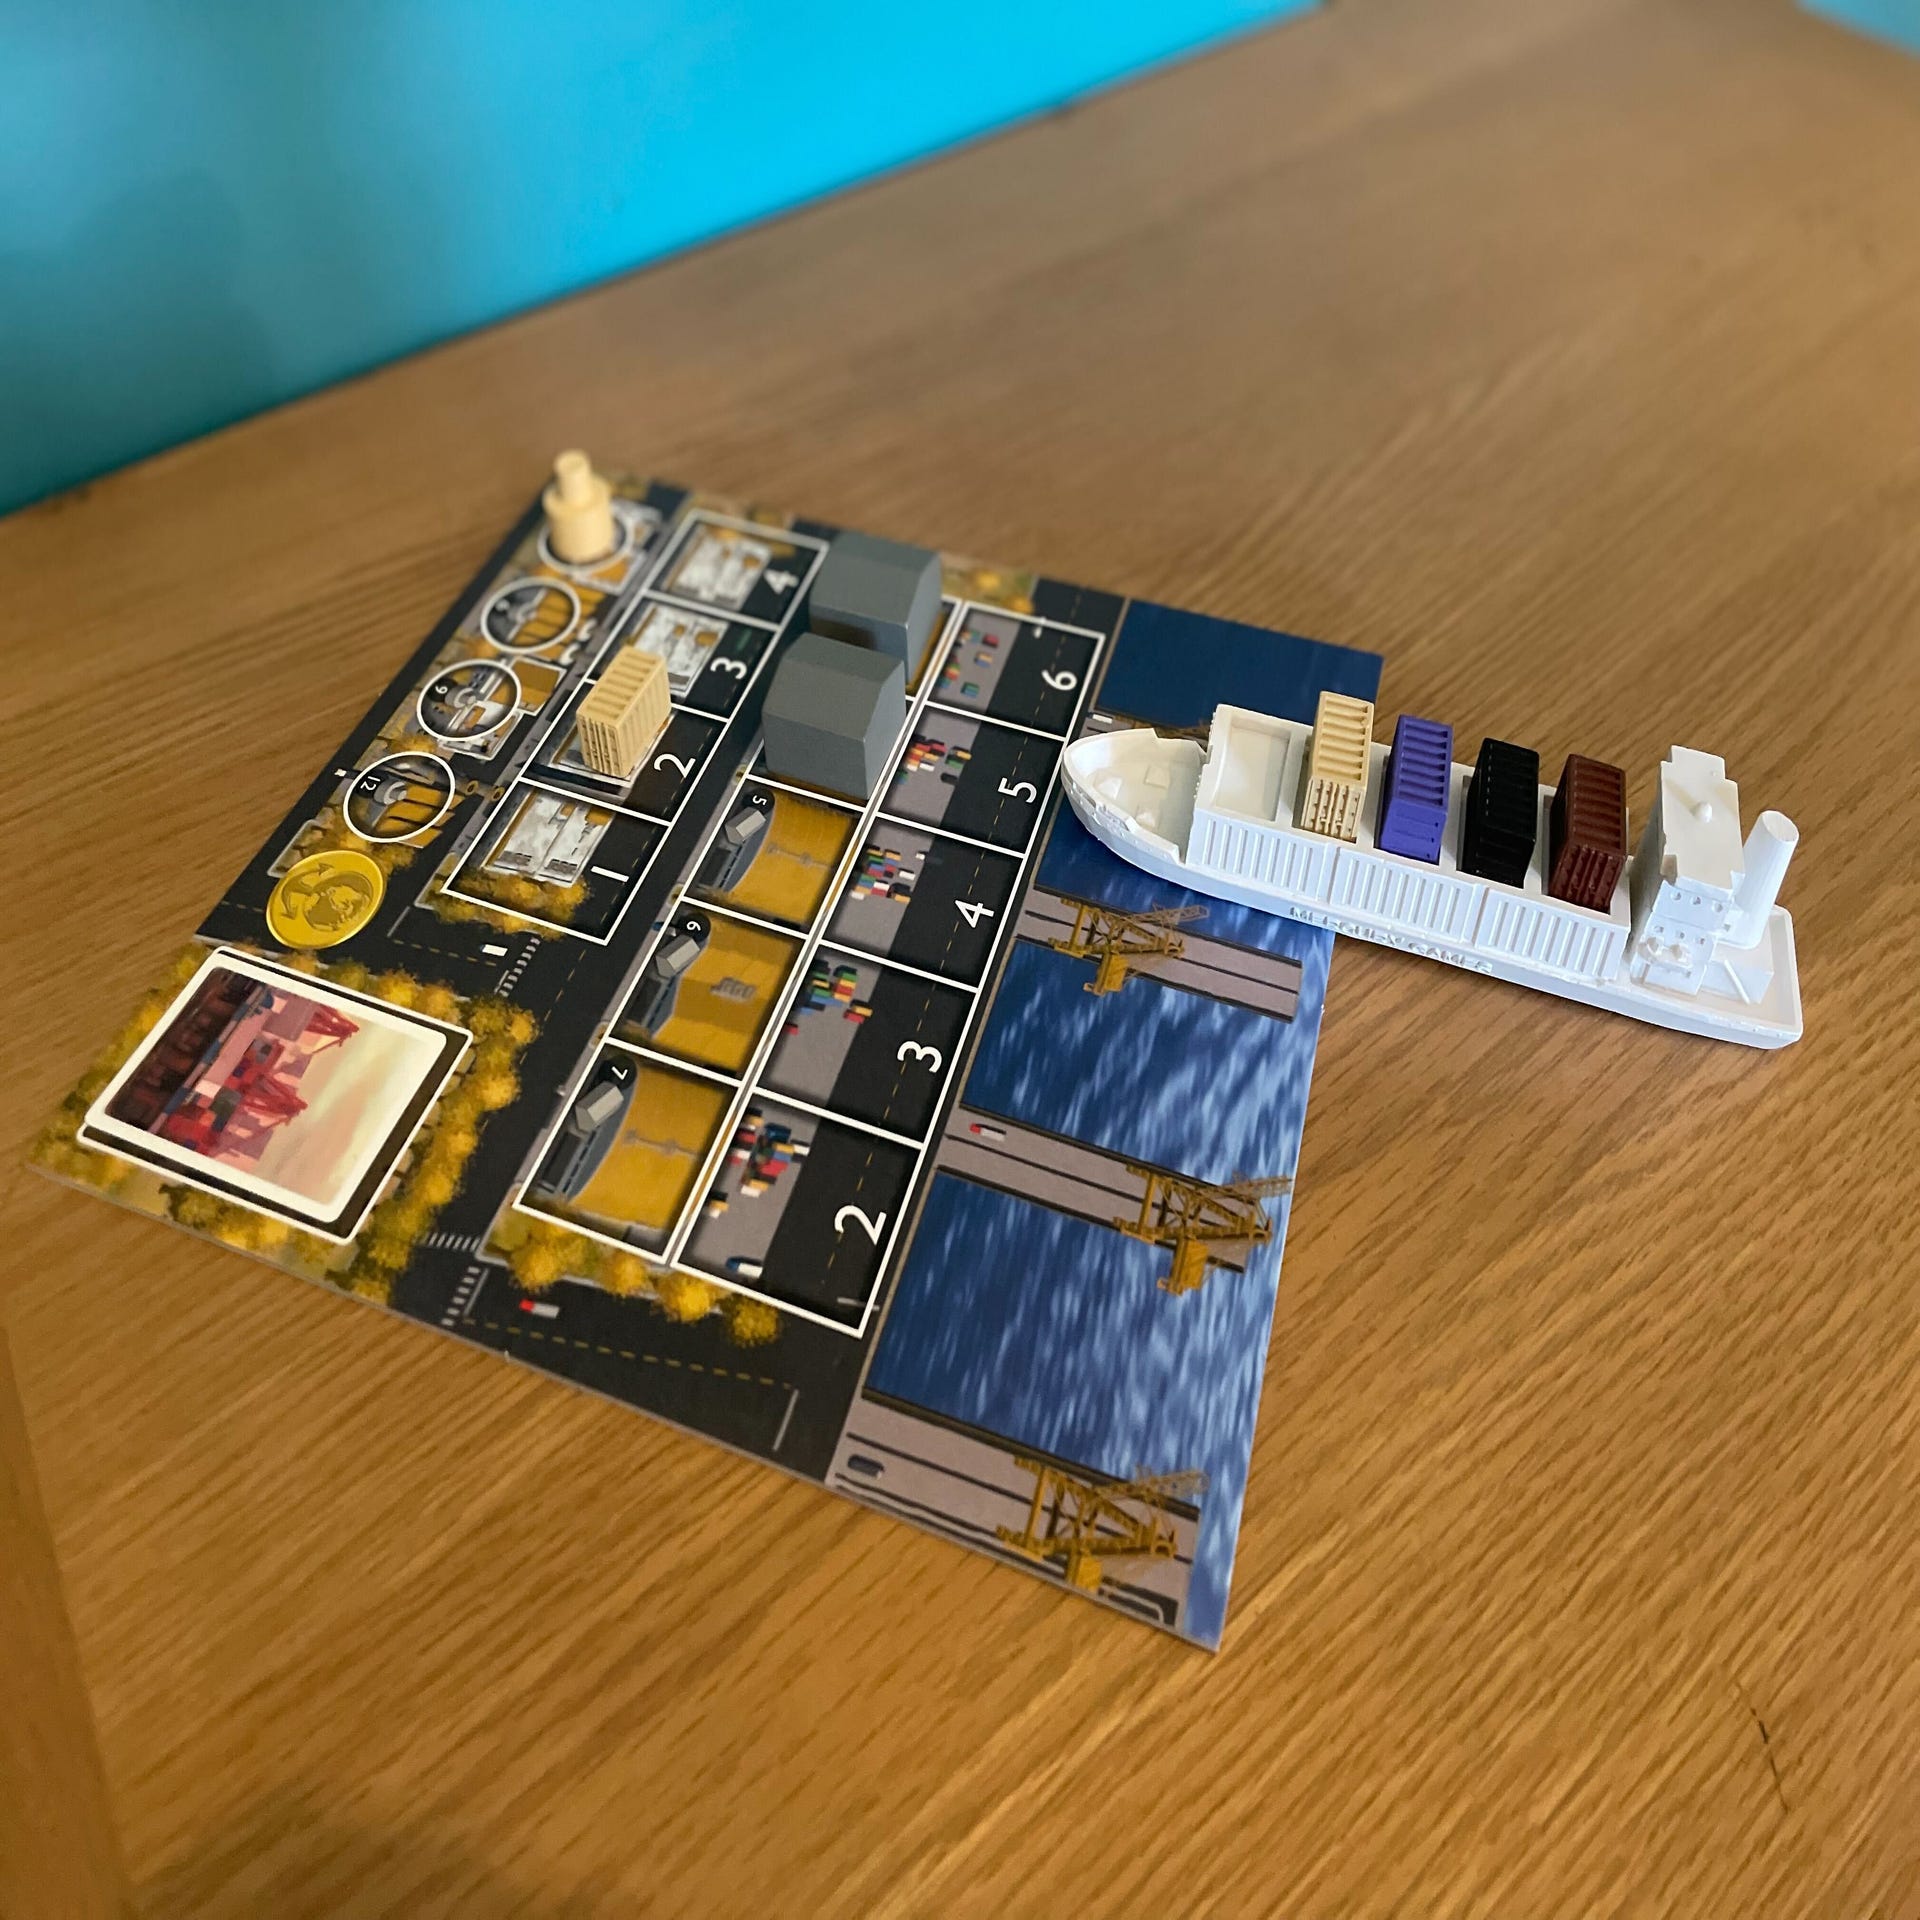 Container – Review – Elusive Meeple